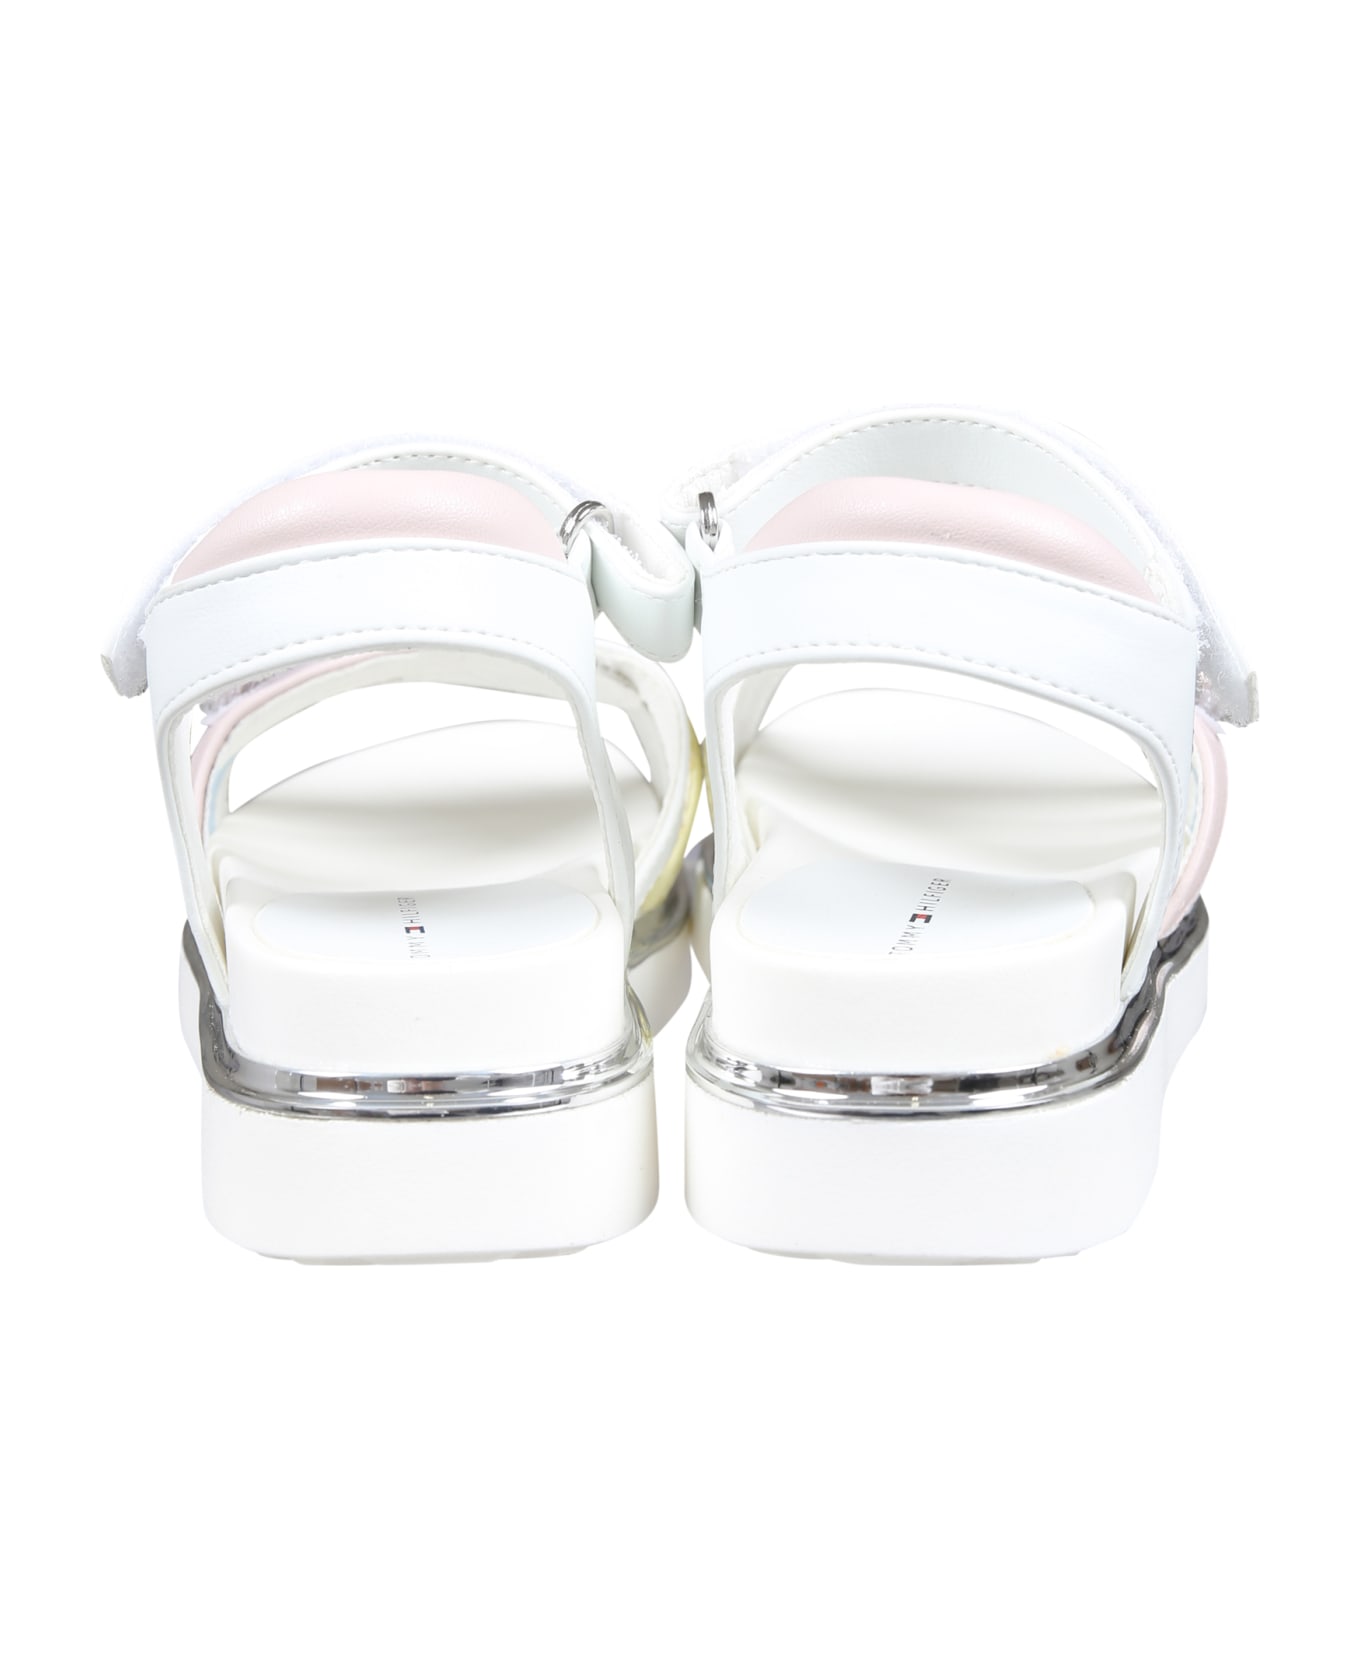 Tommy Hilfiger White Sandals For Girl With Logo - White